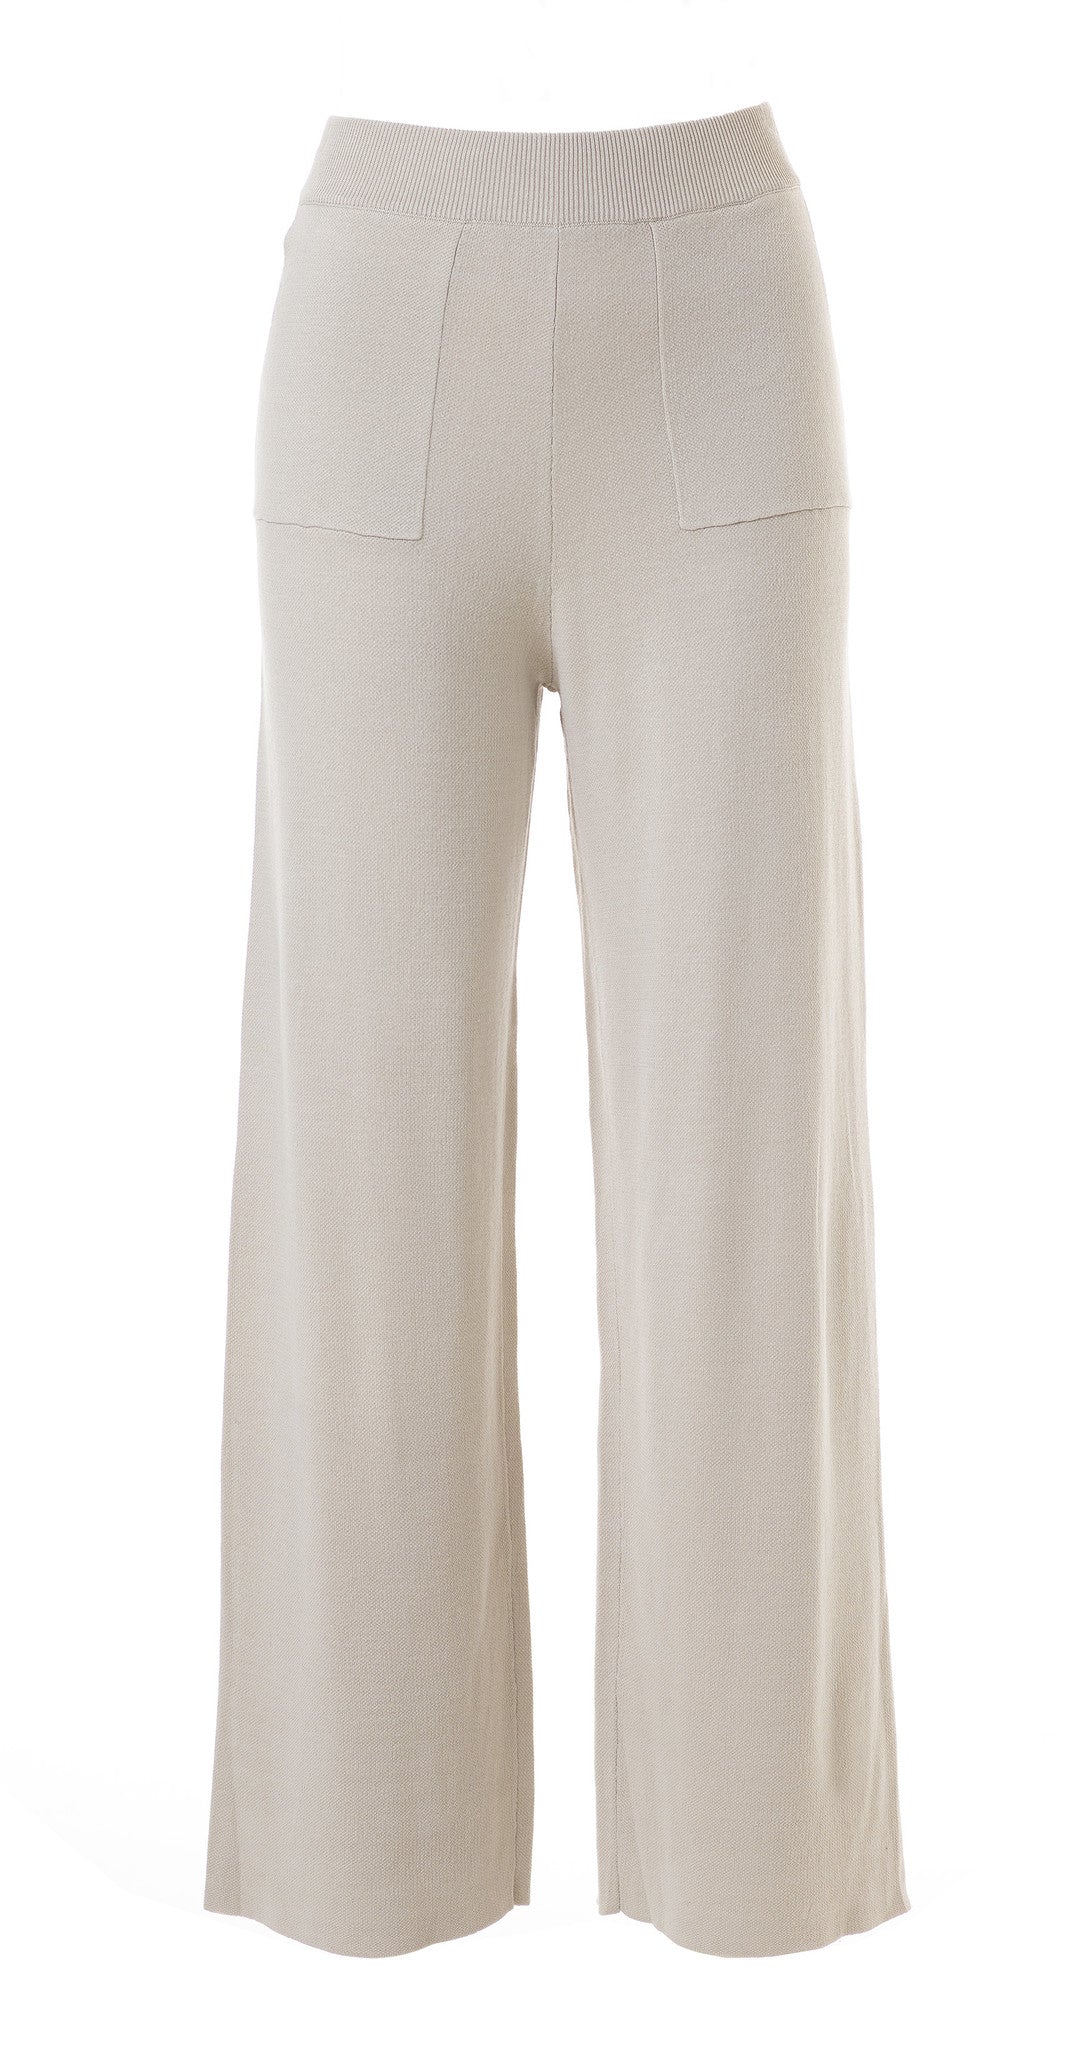 JC Sophie | Mary Ann trousers